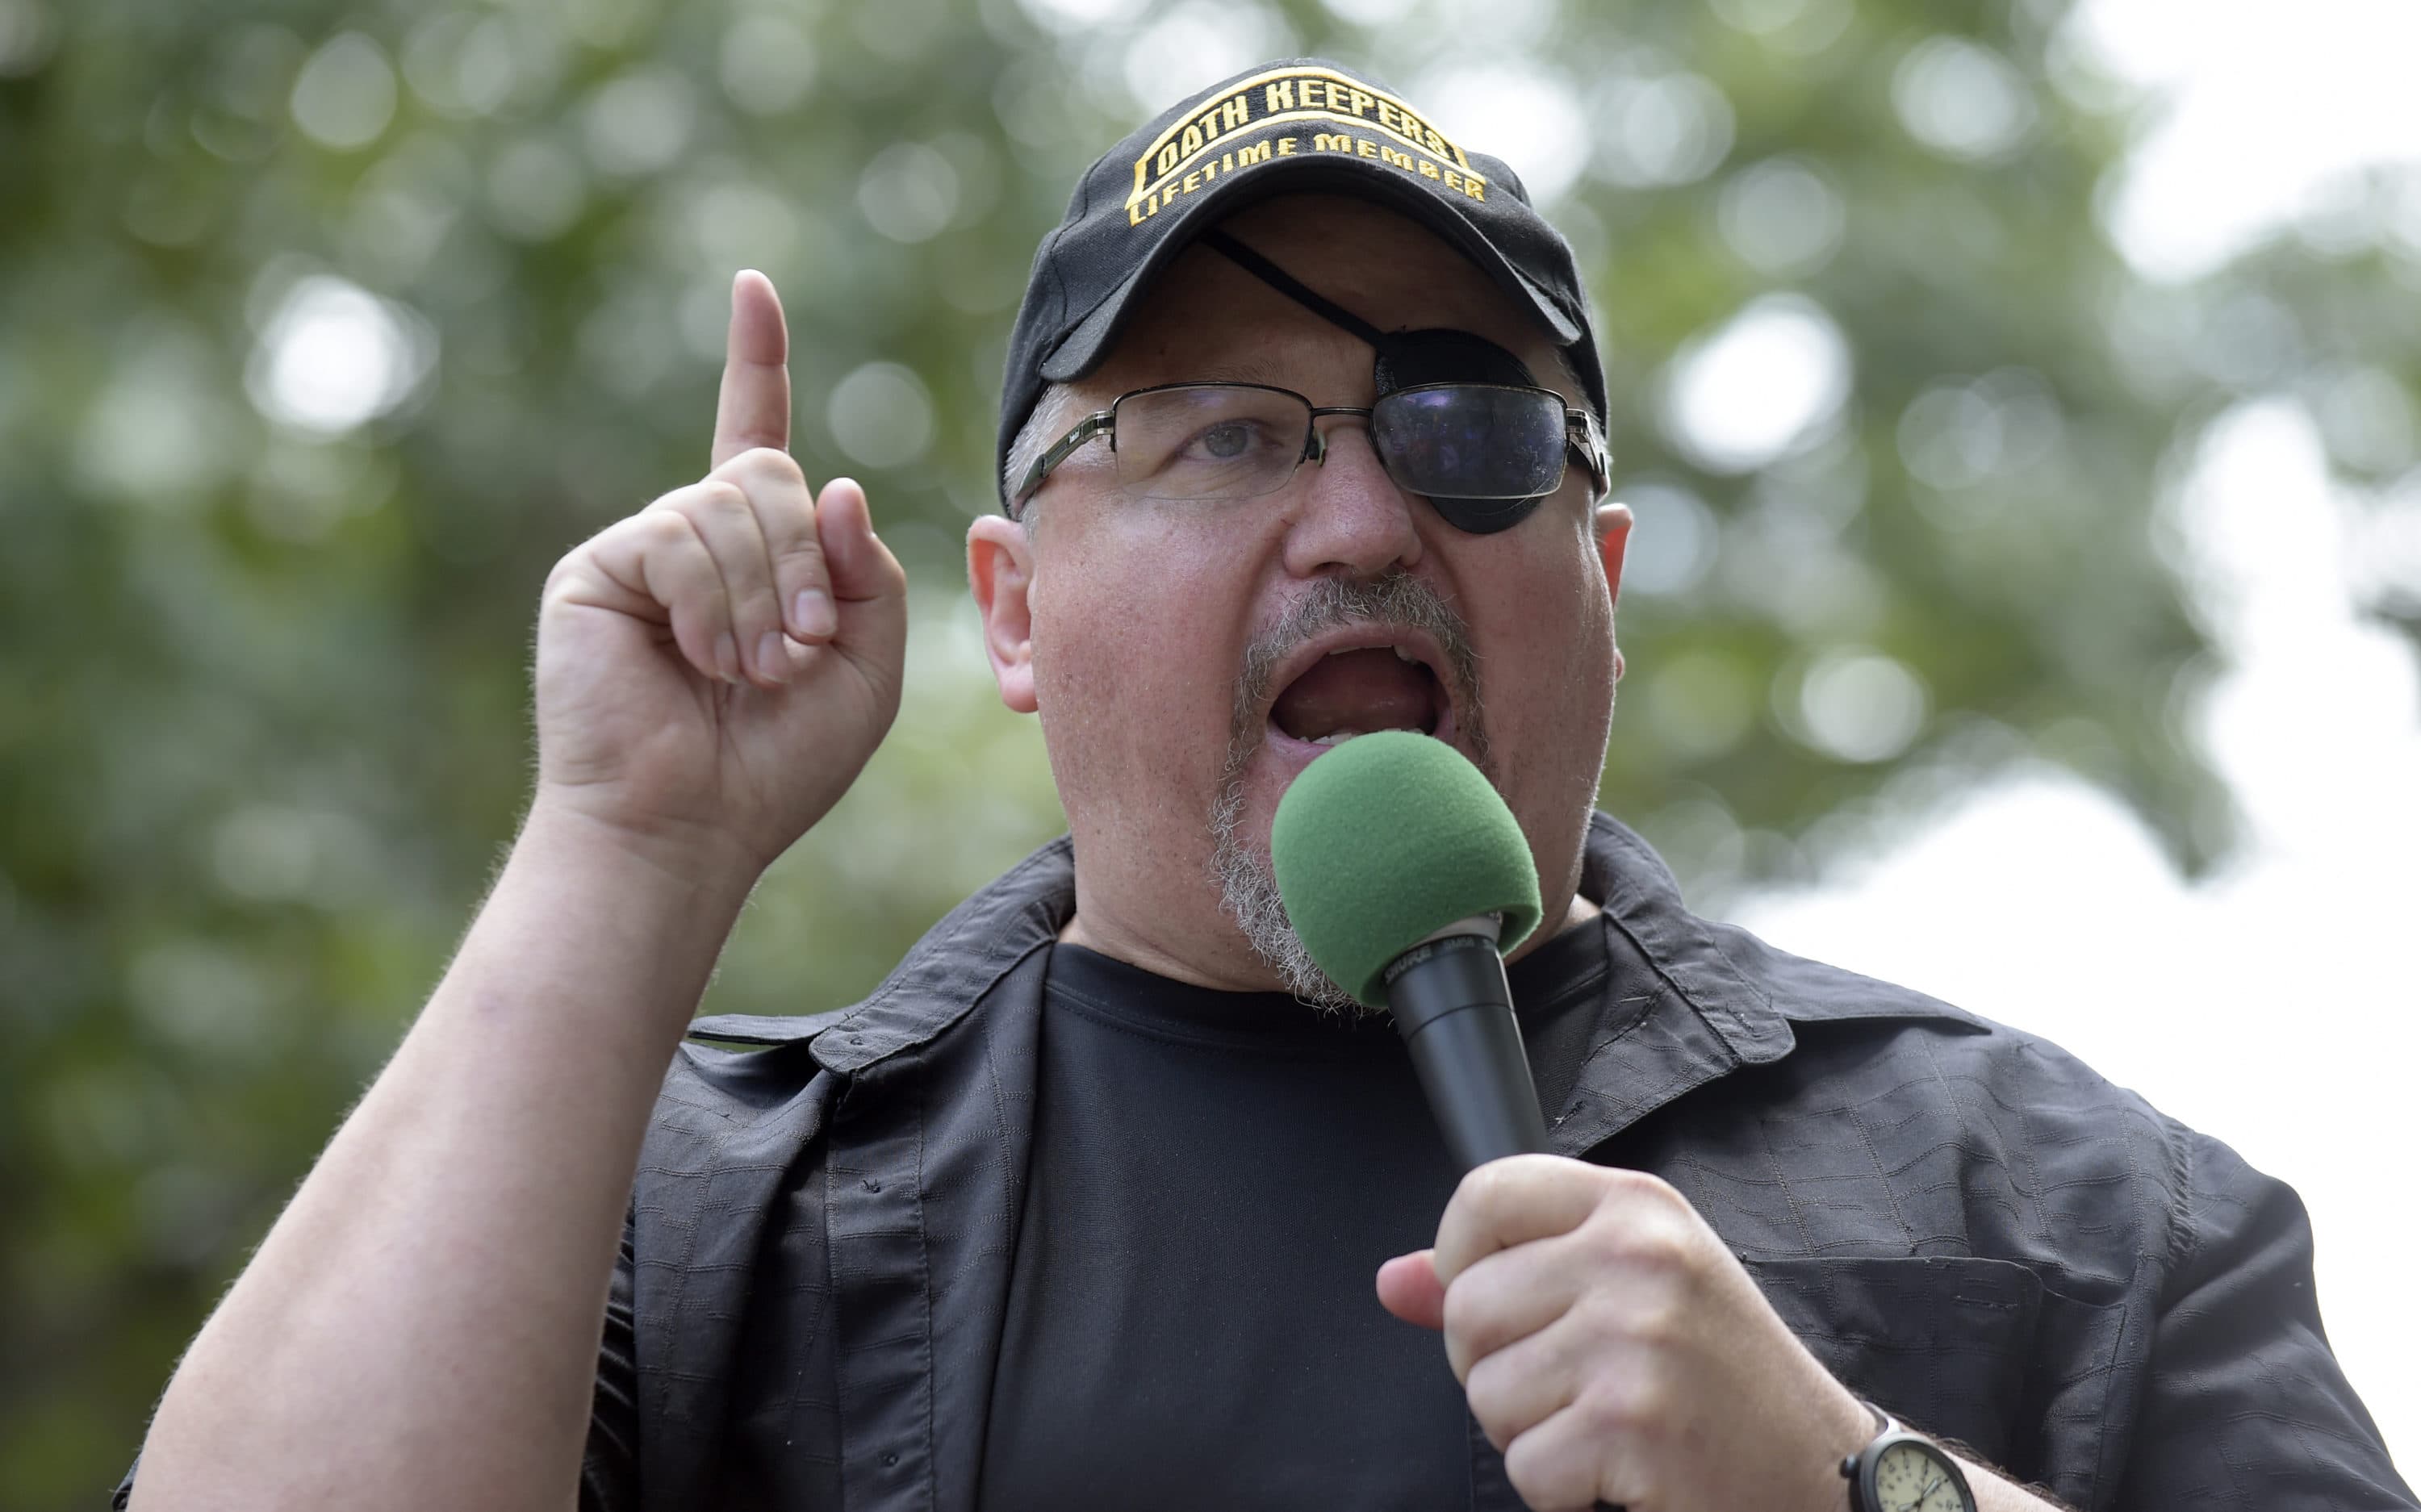 Stewart Rhodes, founder of the citizen militia group known as the Oath Keepers speaks during a rally outside the White House in Washington in 2017. (Susan Walsh/AP)